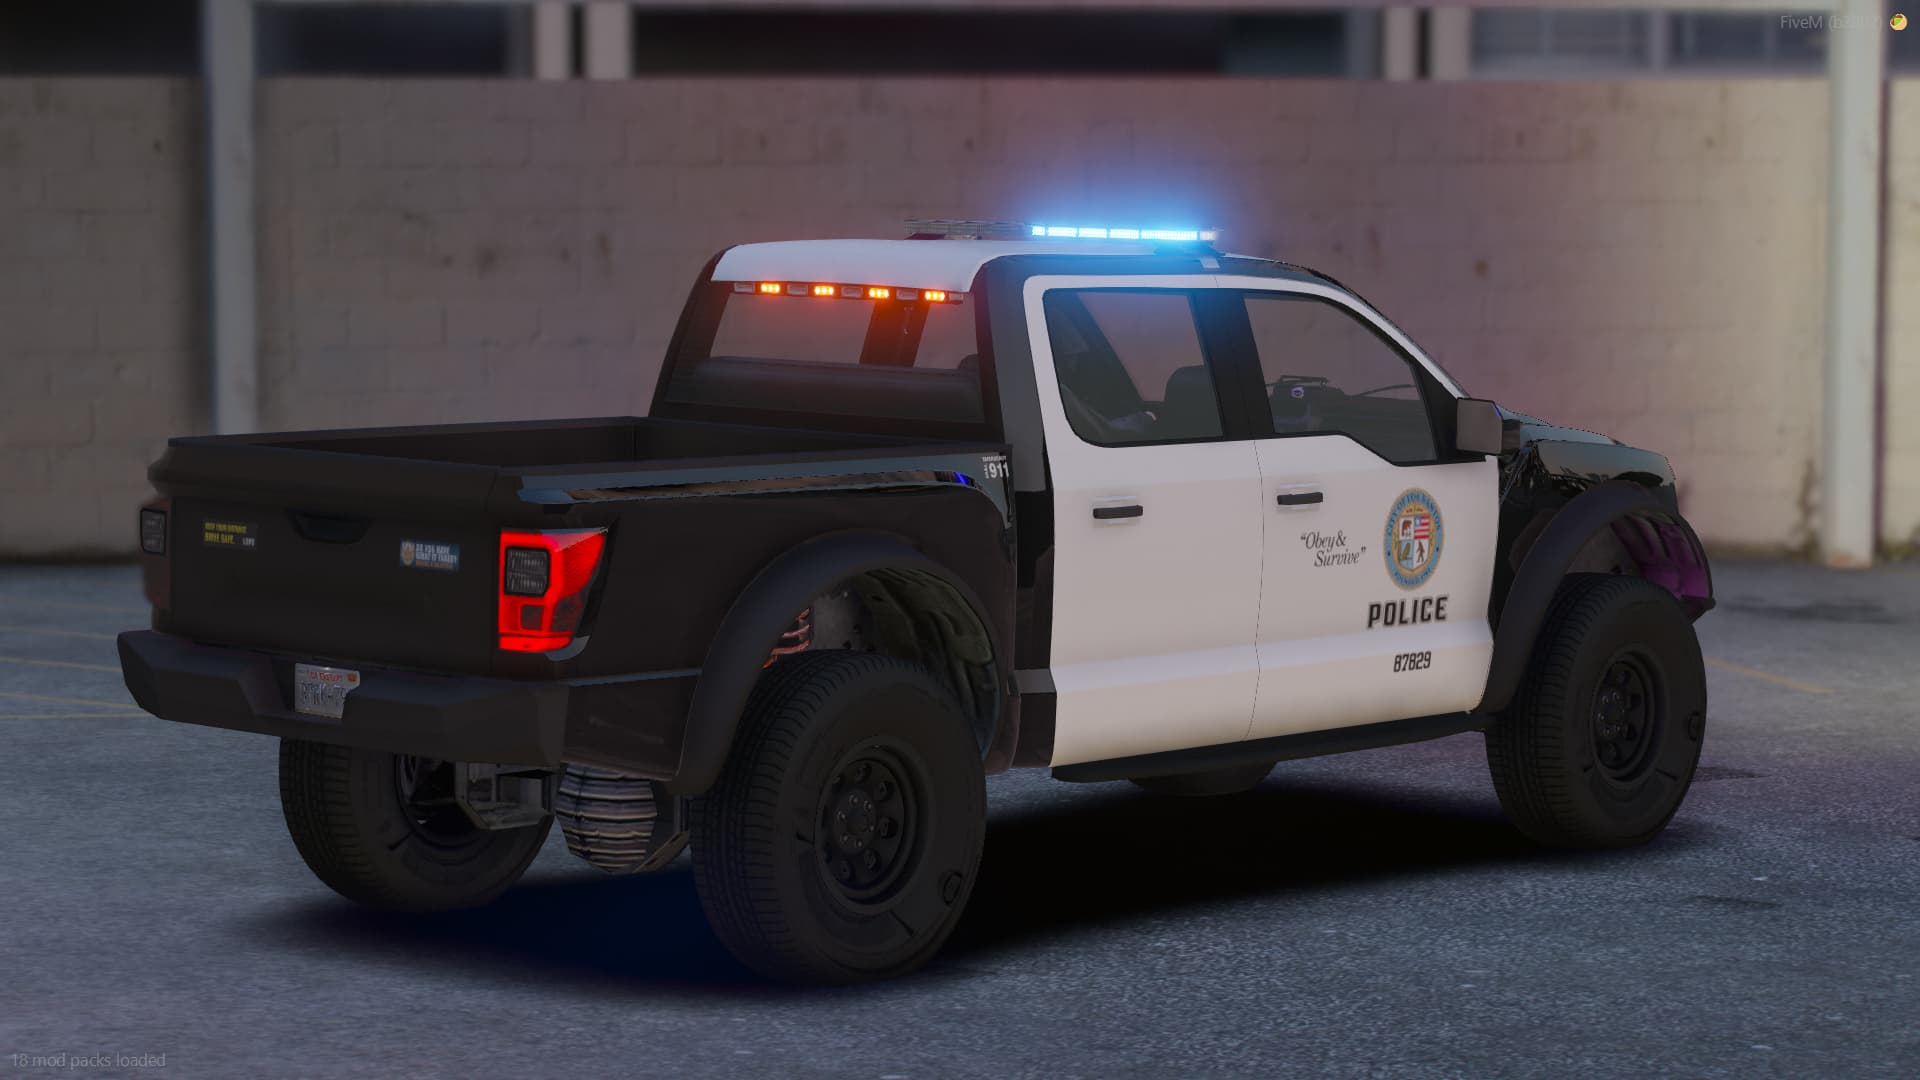 [PAID] [POLICE] Vapid Caracara - Callsigns system - Releases - Cfx.re ...